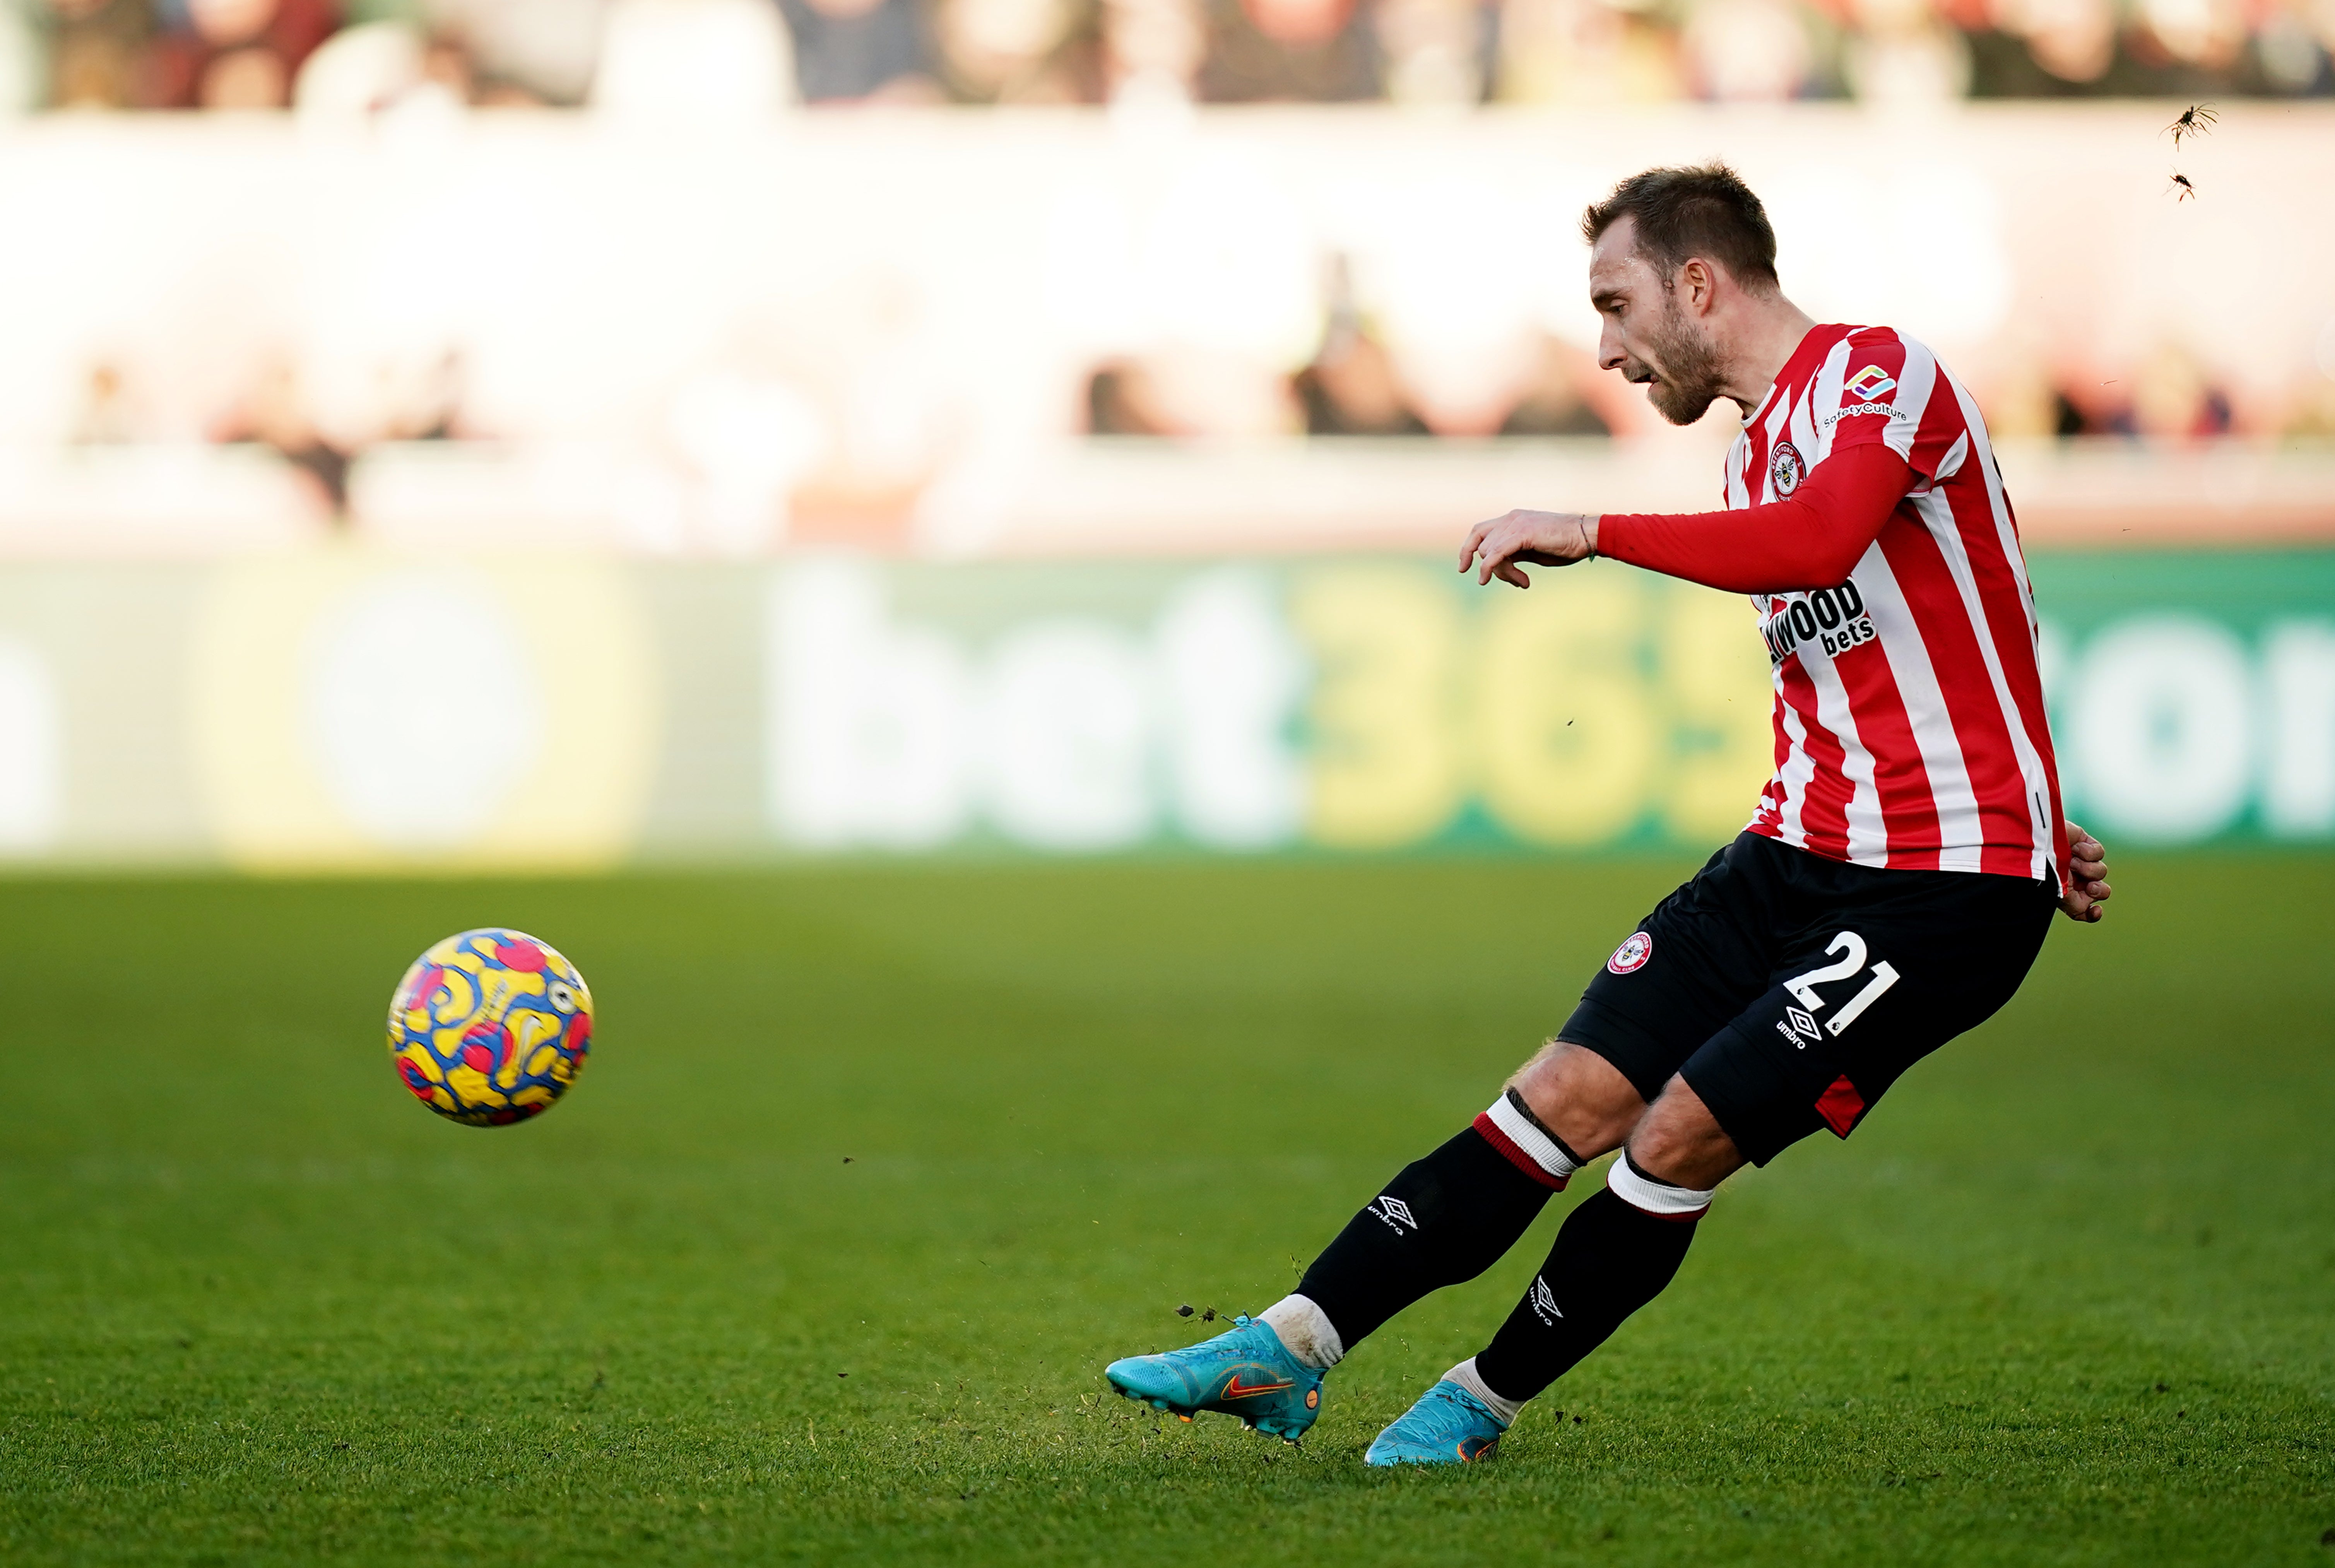 Brentford boss Thomas Frank believes Christian Eriksen can keep Brentford out of relegation trouble